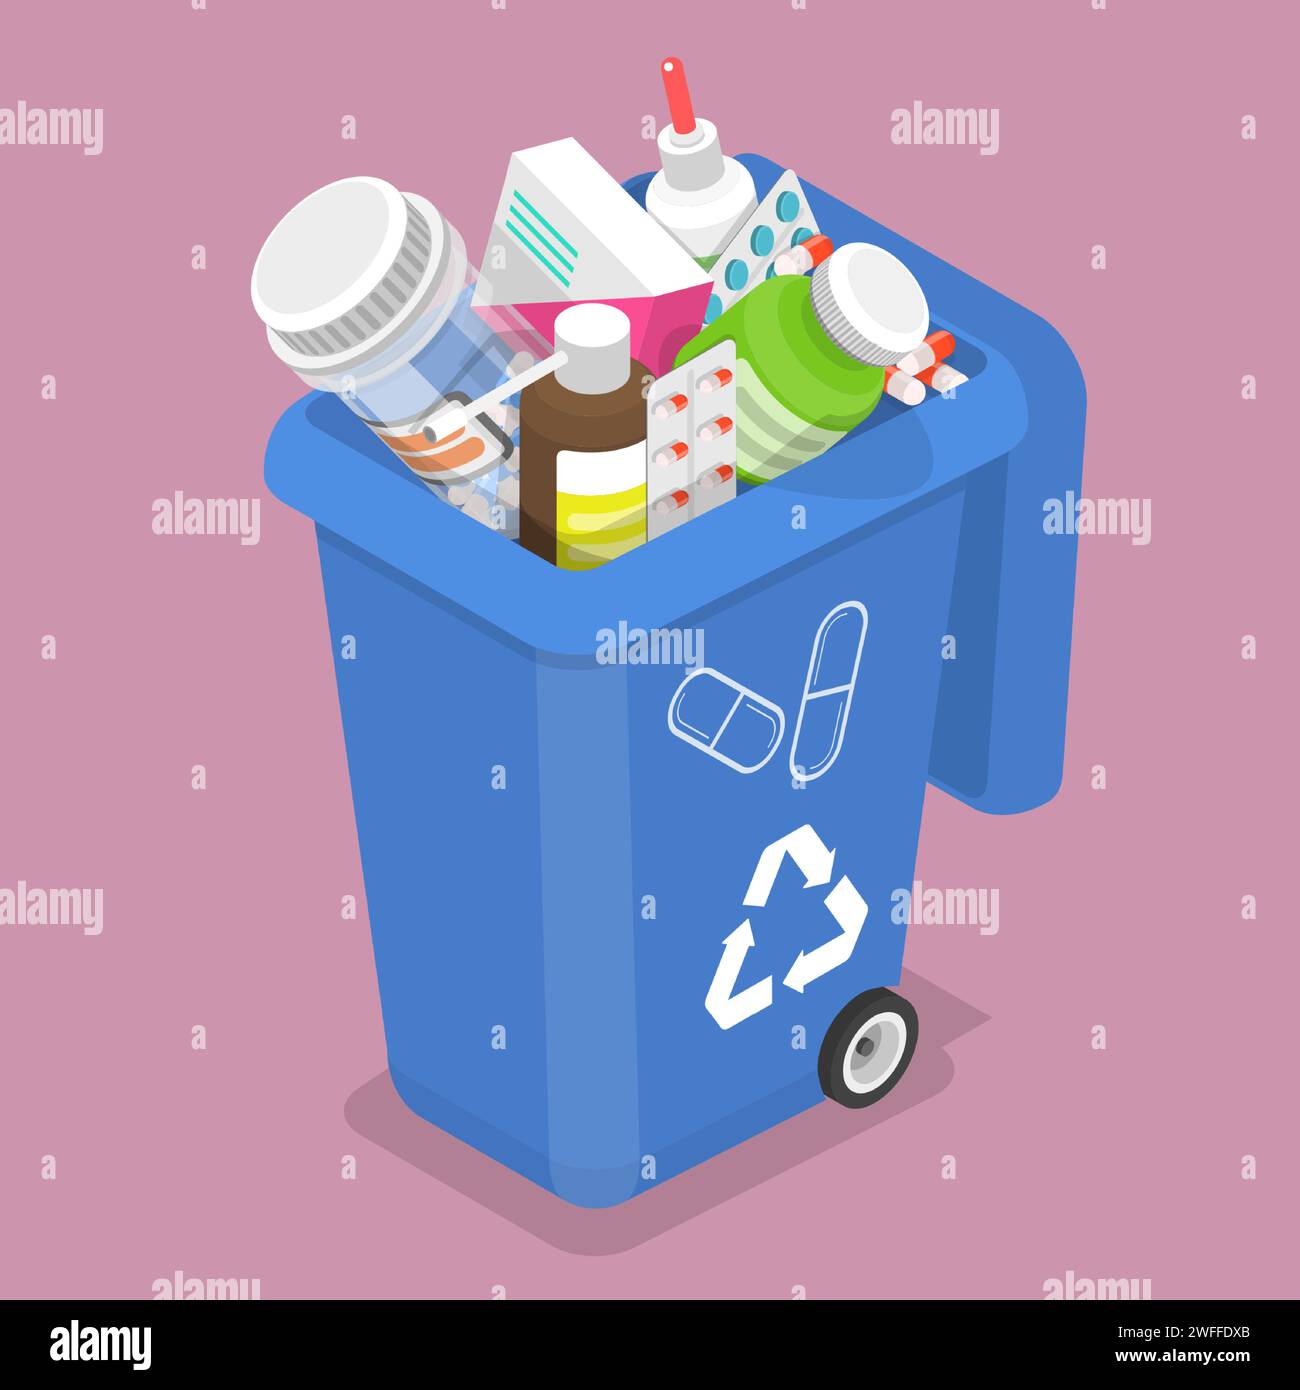 3D Isometric Flat Vector Illustration of Container for Expired and Unused Drugs. Stock Vector